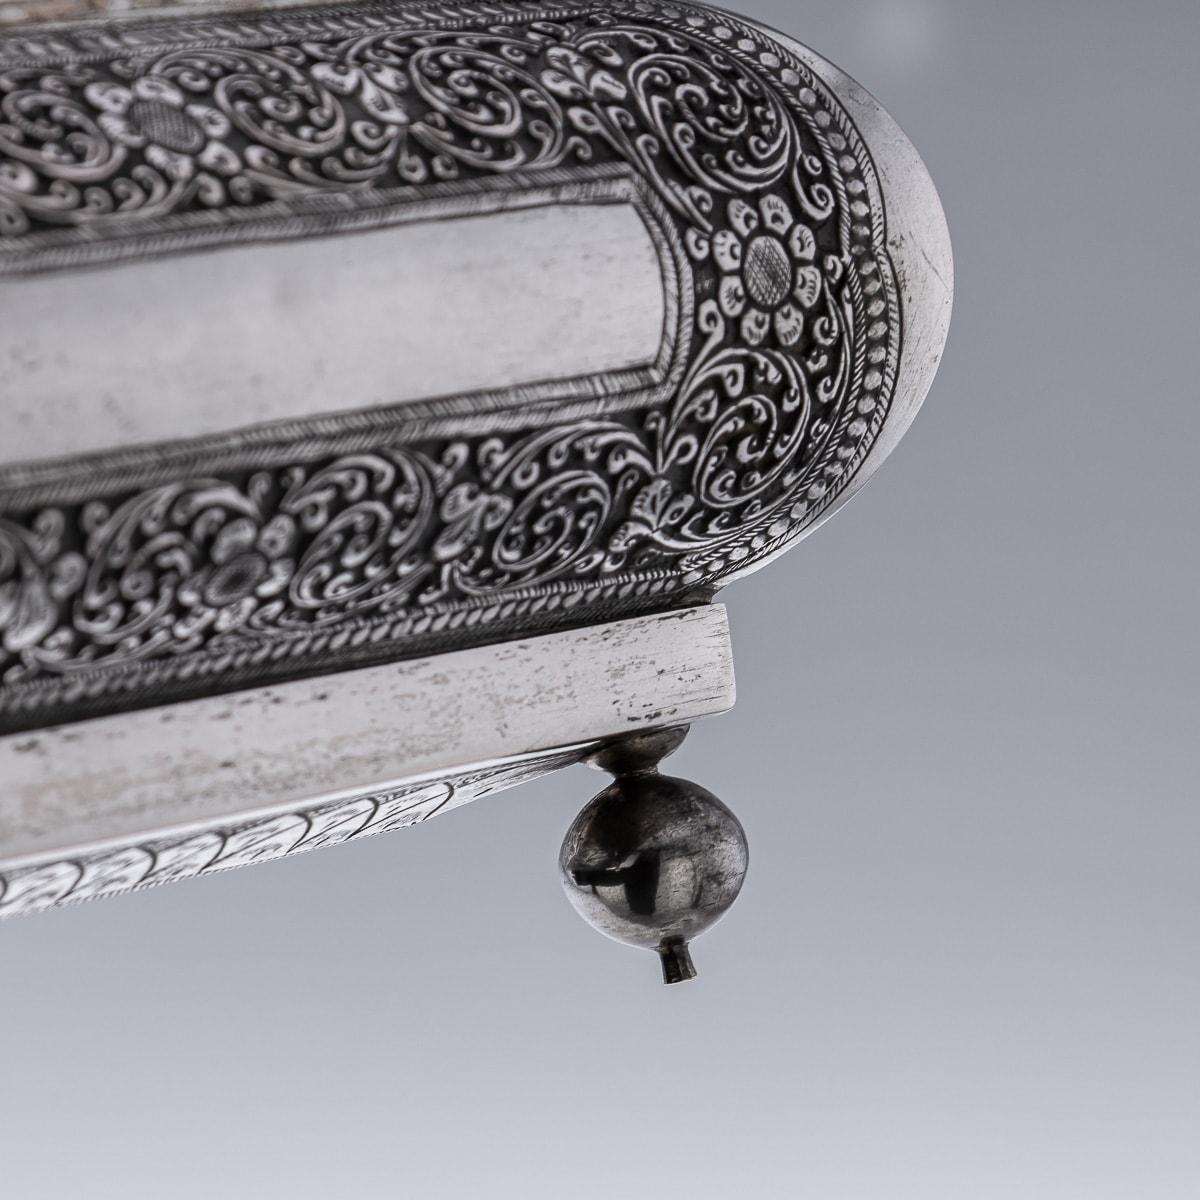 Mid 20th Century Sri Lankan Solid Silver Repousse Box, Colombo c.1930 For Sale 10